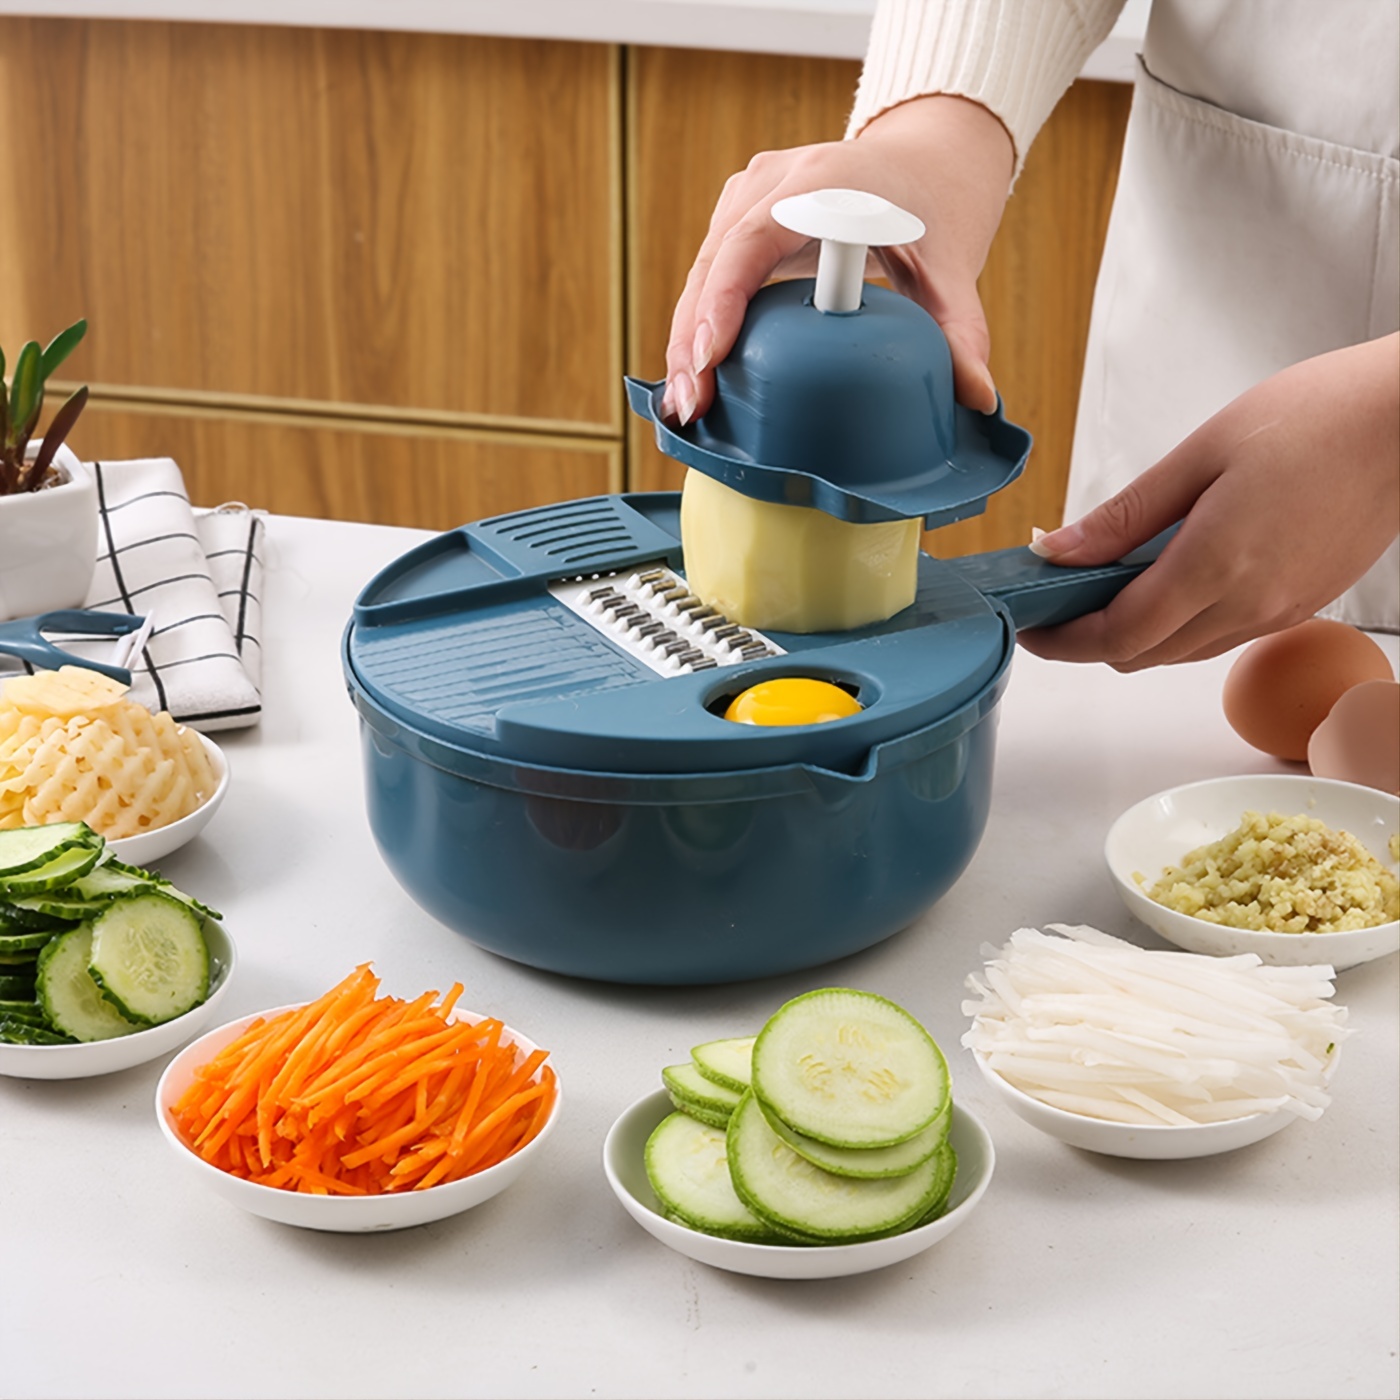 Does it Work? Rotating Vegetable Slicer/Grater with 3 Attachments 